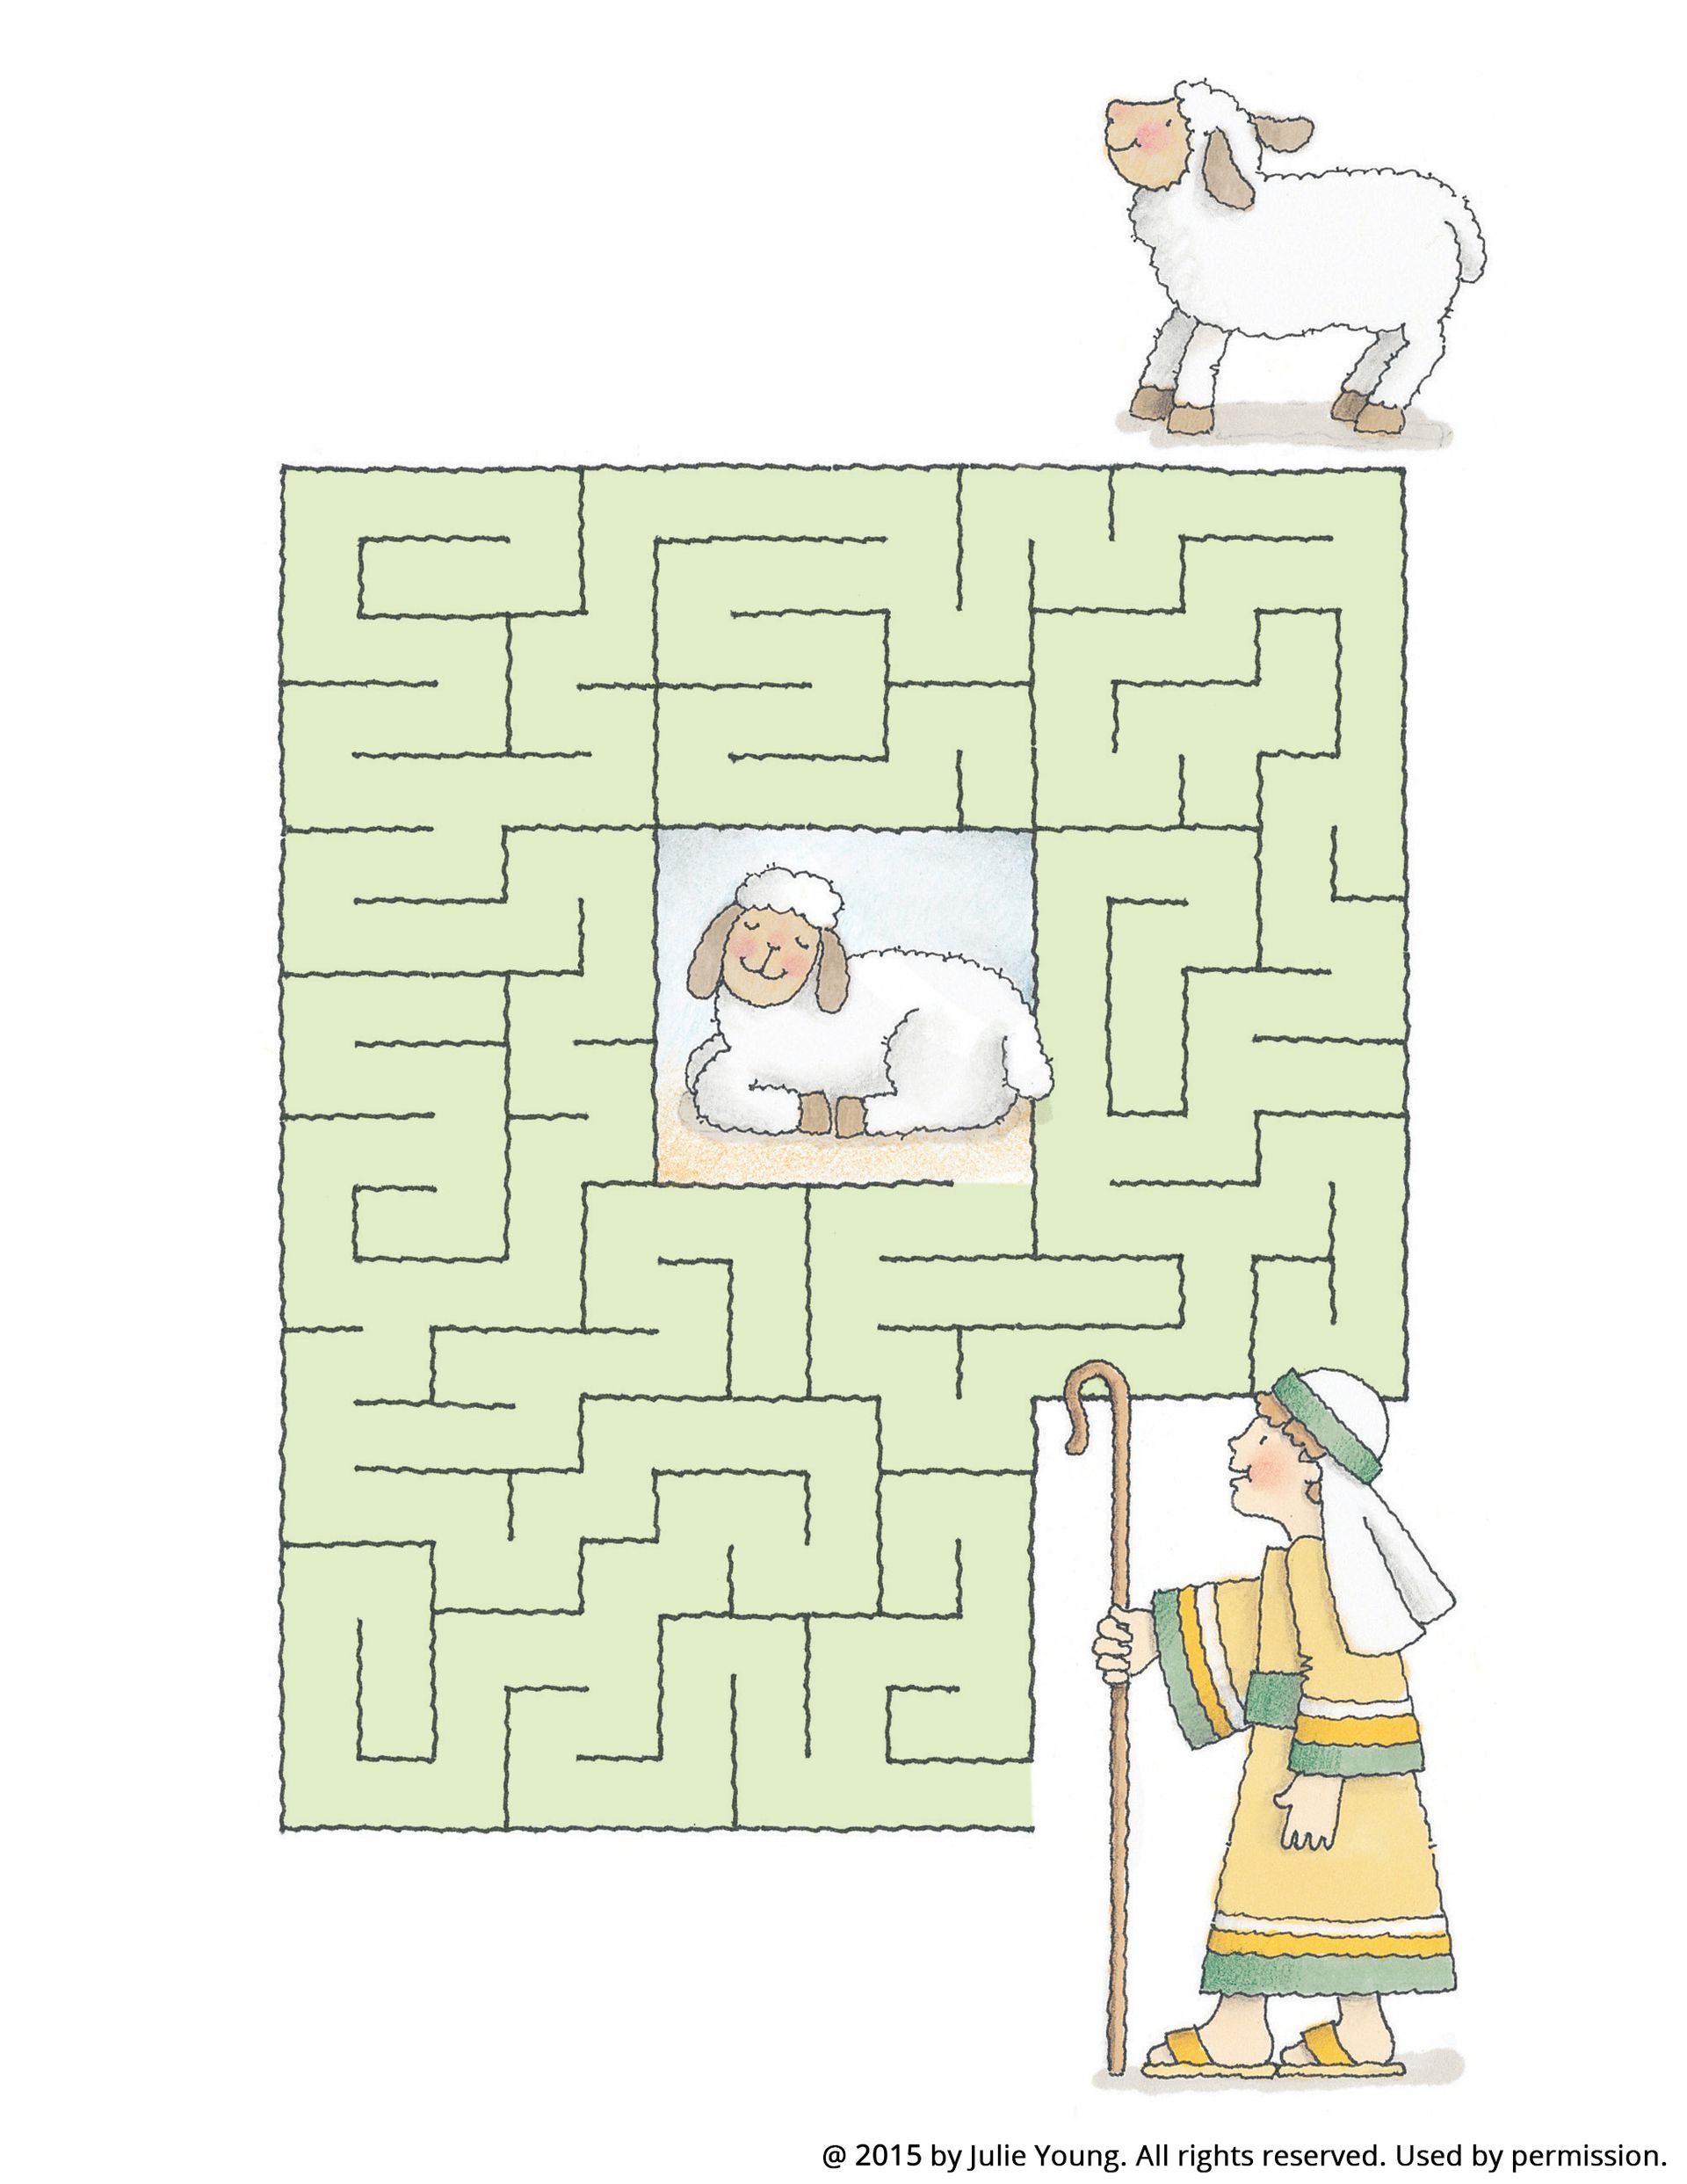 A maze starting with a shepherd boy and leading to a white sheep.